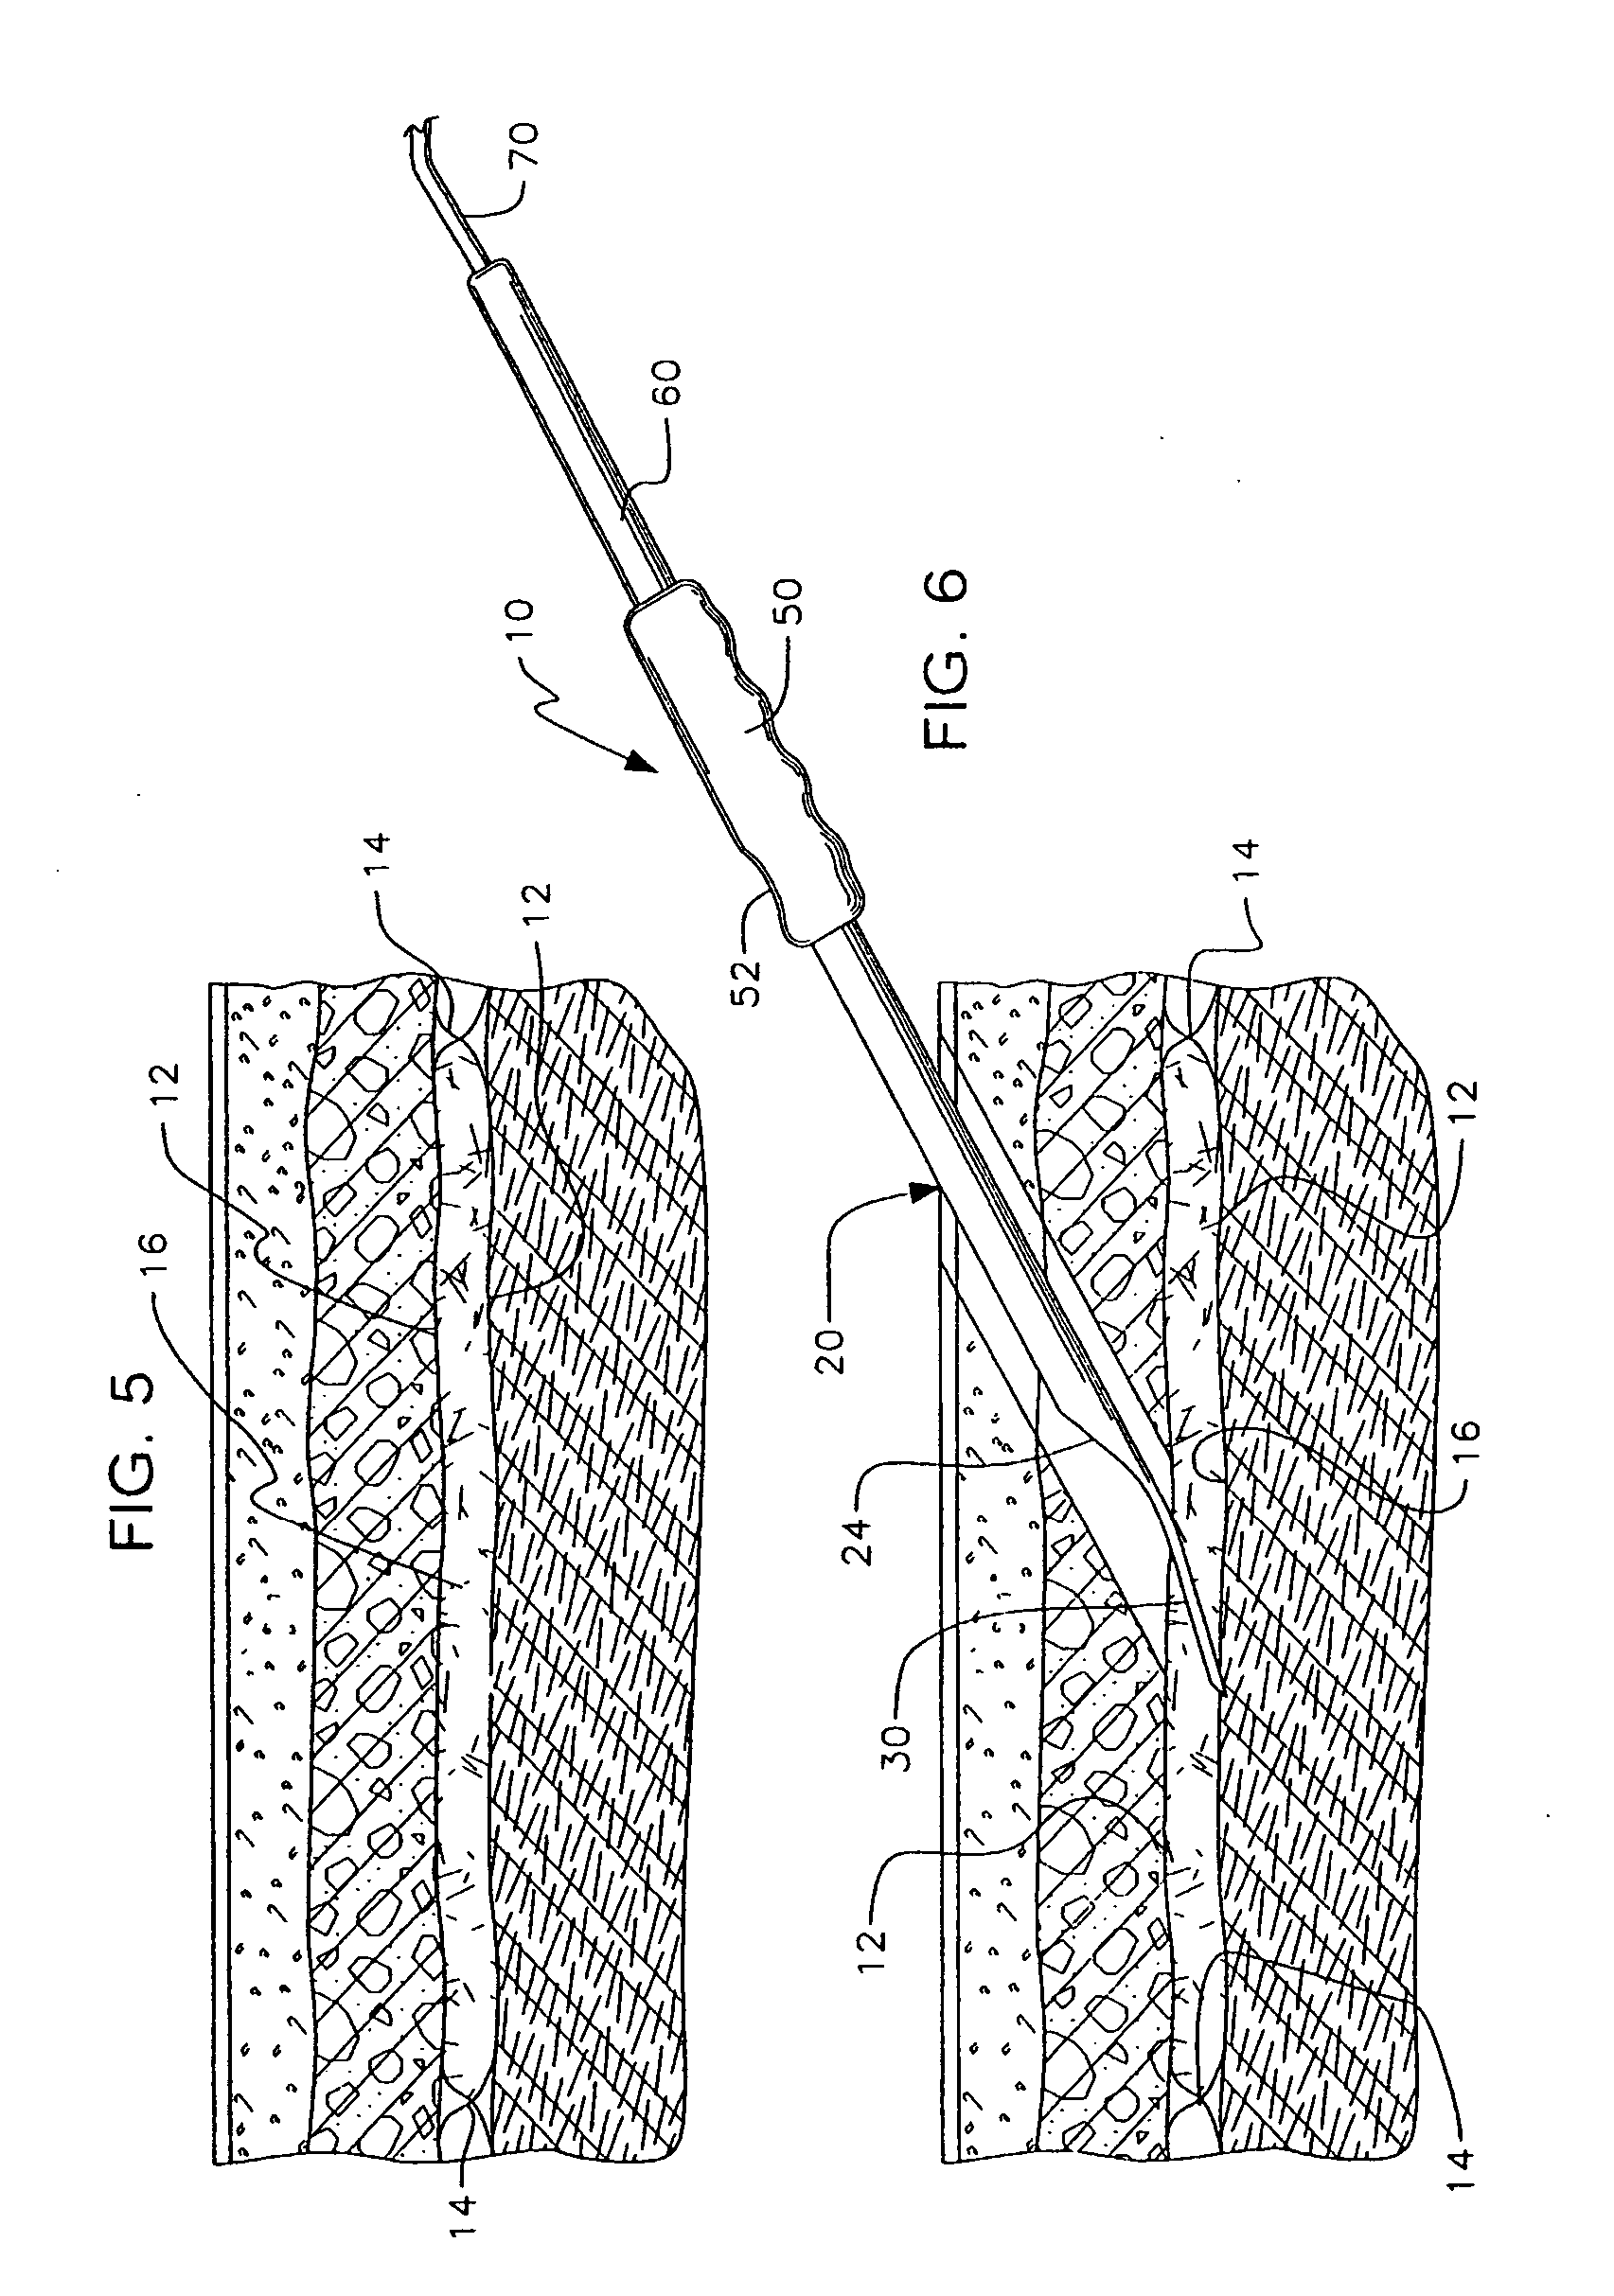 Apparatus for use in fascial cleft surgery for opening an anatomic space